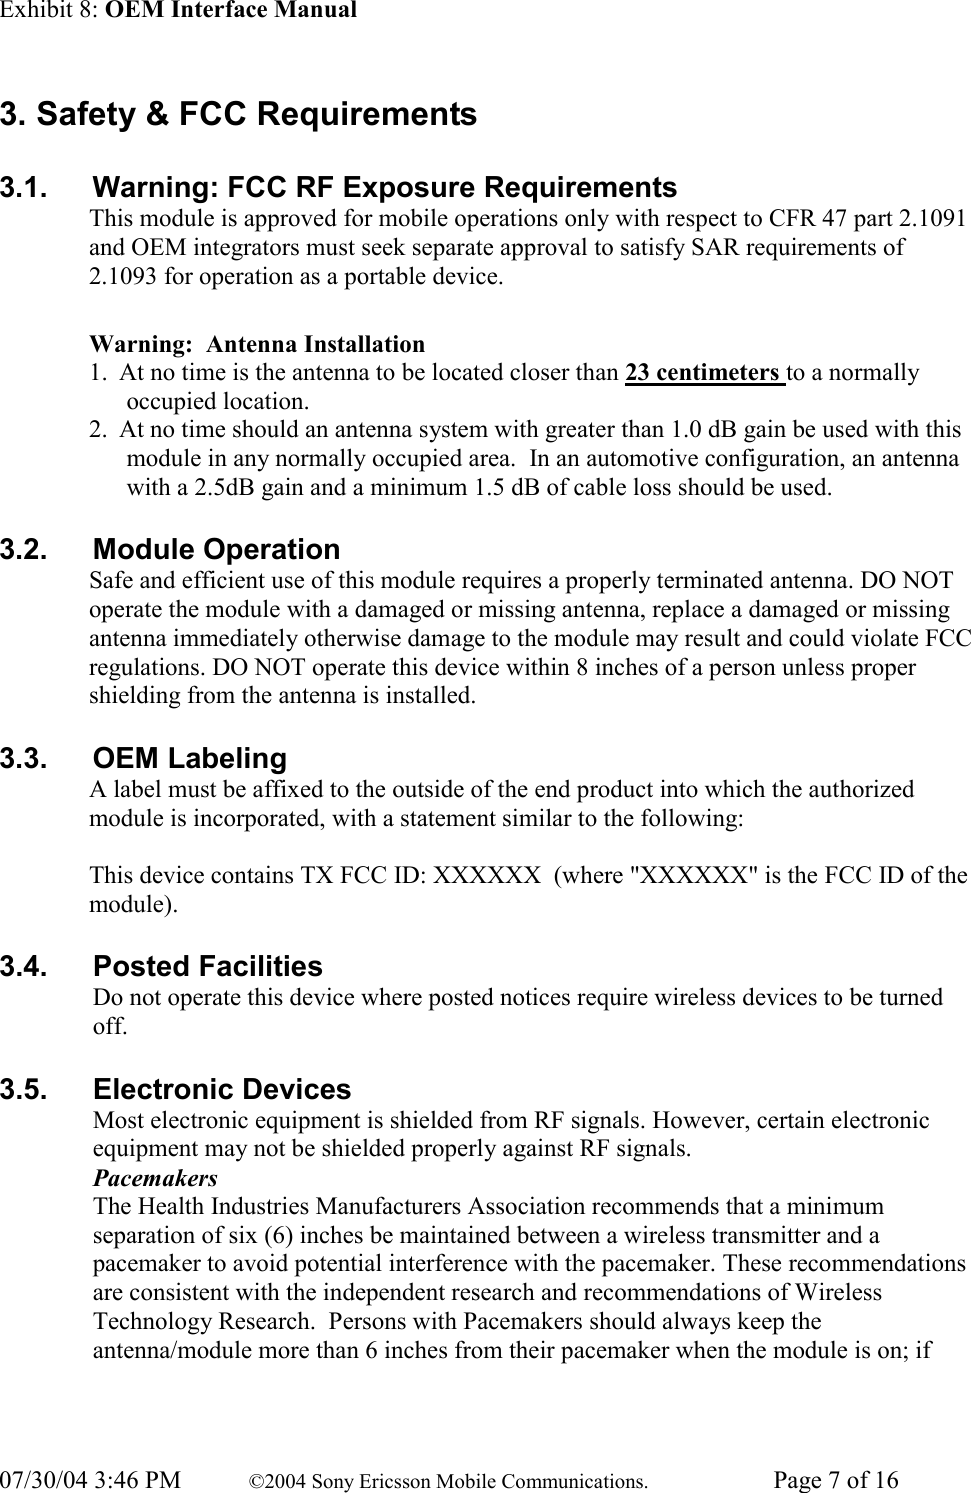 Exhibit 8: OEM Interface Manual 07/30/04 3:46 PM  ©2004 Sony Ericsson Mobile Communications.  Page 7 of 16 3. Safety &amp; FCC Requirements 3.1.   Warning: FCC RF Exposure Requirements This module is approved for mobile operations only with respect to CFR 47 part 2.1091 and OEM integrators must seek separate approval to satisfy SAR requirements of 2.1093 for operation as a portable device.     Warning:  Antenna Installation 1. At no time is the antenna to be located closer than 23 centimeters to a normally occupied location. 2. At no time should an antenna system with greater than 1.0 dB gain be used with this module in any normally occupied area.  In an automotive configuration, an antenna with a 2.5dB gain and a minimum 1.5 dB of cable loss should be used. 3.2.  Module Operation Safe and efficient use of this module requires a properly terminated antenna. DO NOT operate the module with a damaged or missing antenna, replace a damaged or missing antenna immediately otherwise damage to the module may result and could violate FCC regulations. DO NOT operate this device within 8 inches of a person unless proper shielding from the antenna is installed. 3.3.  OEM Labeling A label must be affixed to the outside of the end product into which the authorized module is incorporated, with a statement similar to the following:  This device contains TX FCC ID: XXXXXX  (where &quot;XXXXXX&quot; is the FCC ID of the module). 3.4.   Posted Facilities Do not operate this device where posted notices require wireless devices to be turned off. 3.5.   Electronic Devices Most electronic equipment is shielded from RF signals. However, certain electronic equipment may not be shielded properly against RF signals. Pacemakers The Health Industries Manufacturers Association recommends that a minimum separation of six (6) inches be maintained between a wireless transmitter and a pacemaker to avoid potential interference with the pacemaker. These recommendations are consistent with the independent research and recommendations of Wireless Technology Research.  Persons with Pacemakers should always keep the antenna/module more than 6 inches from their pacemaker when the module is on; if 